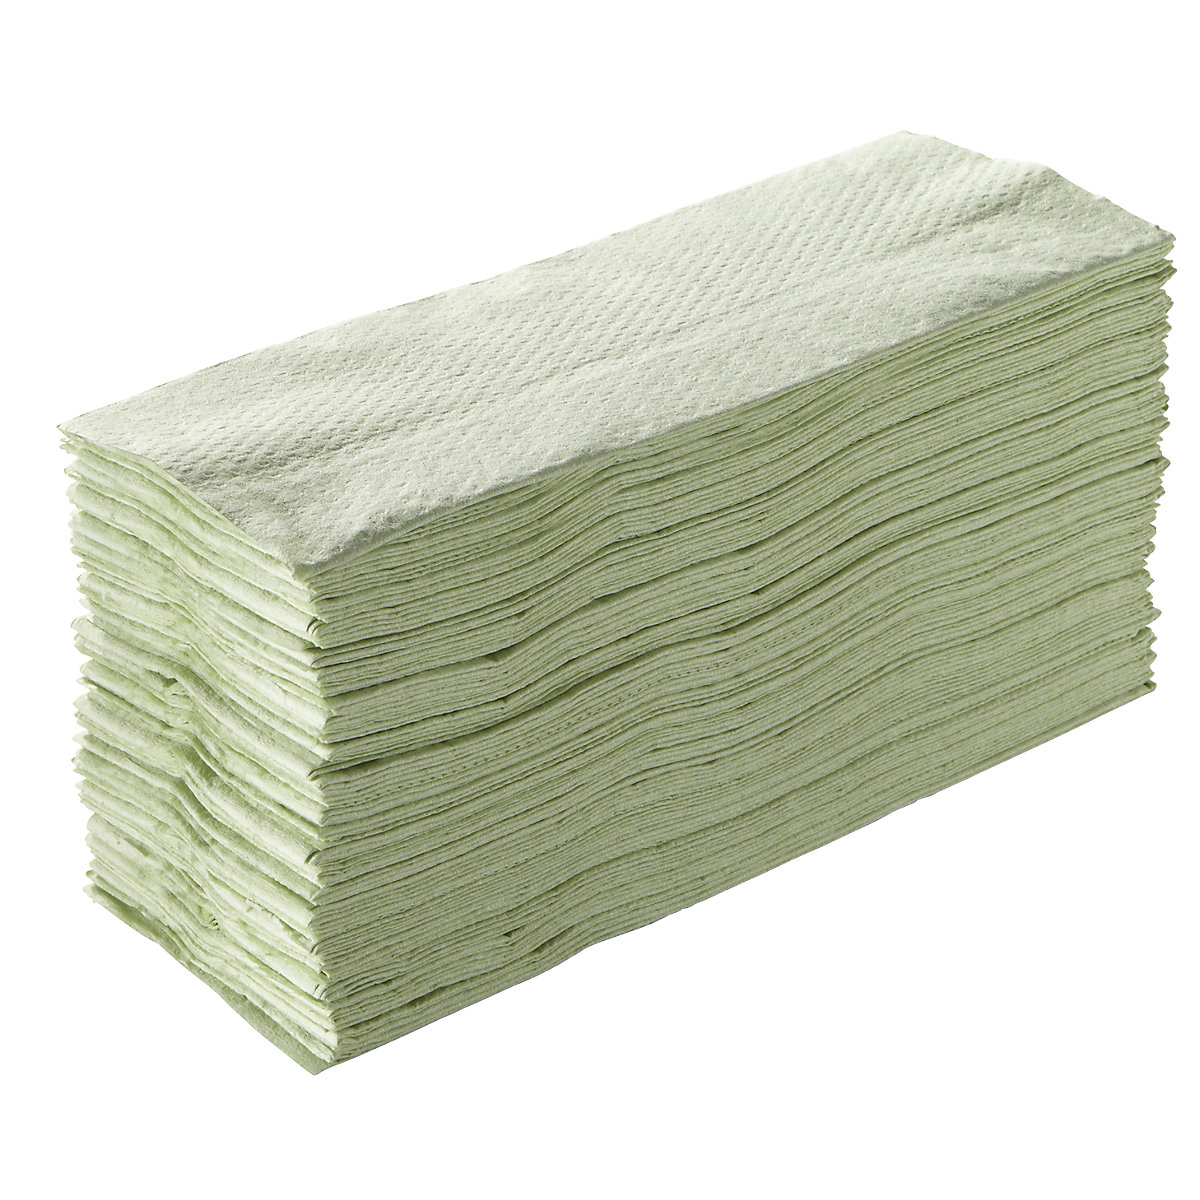 TORK – Folded paper towels, layer folded tissue, green, pack of 2560 towels